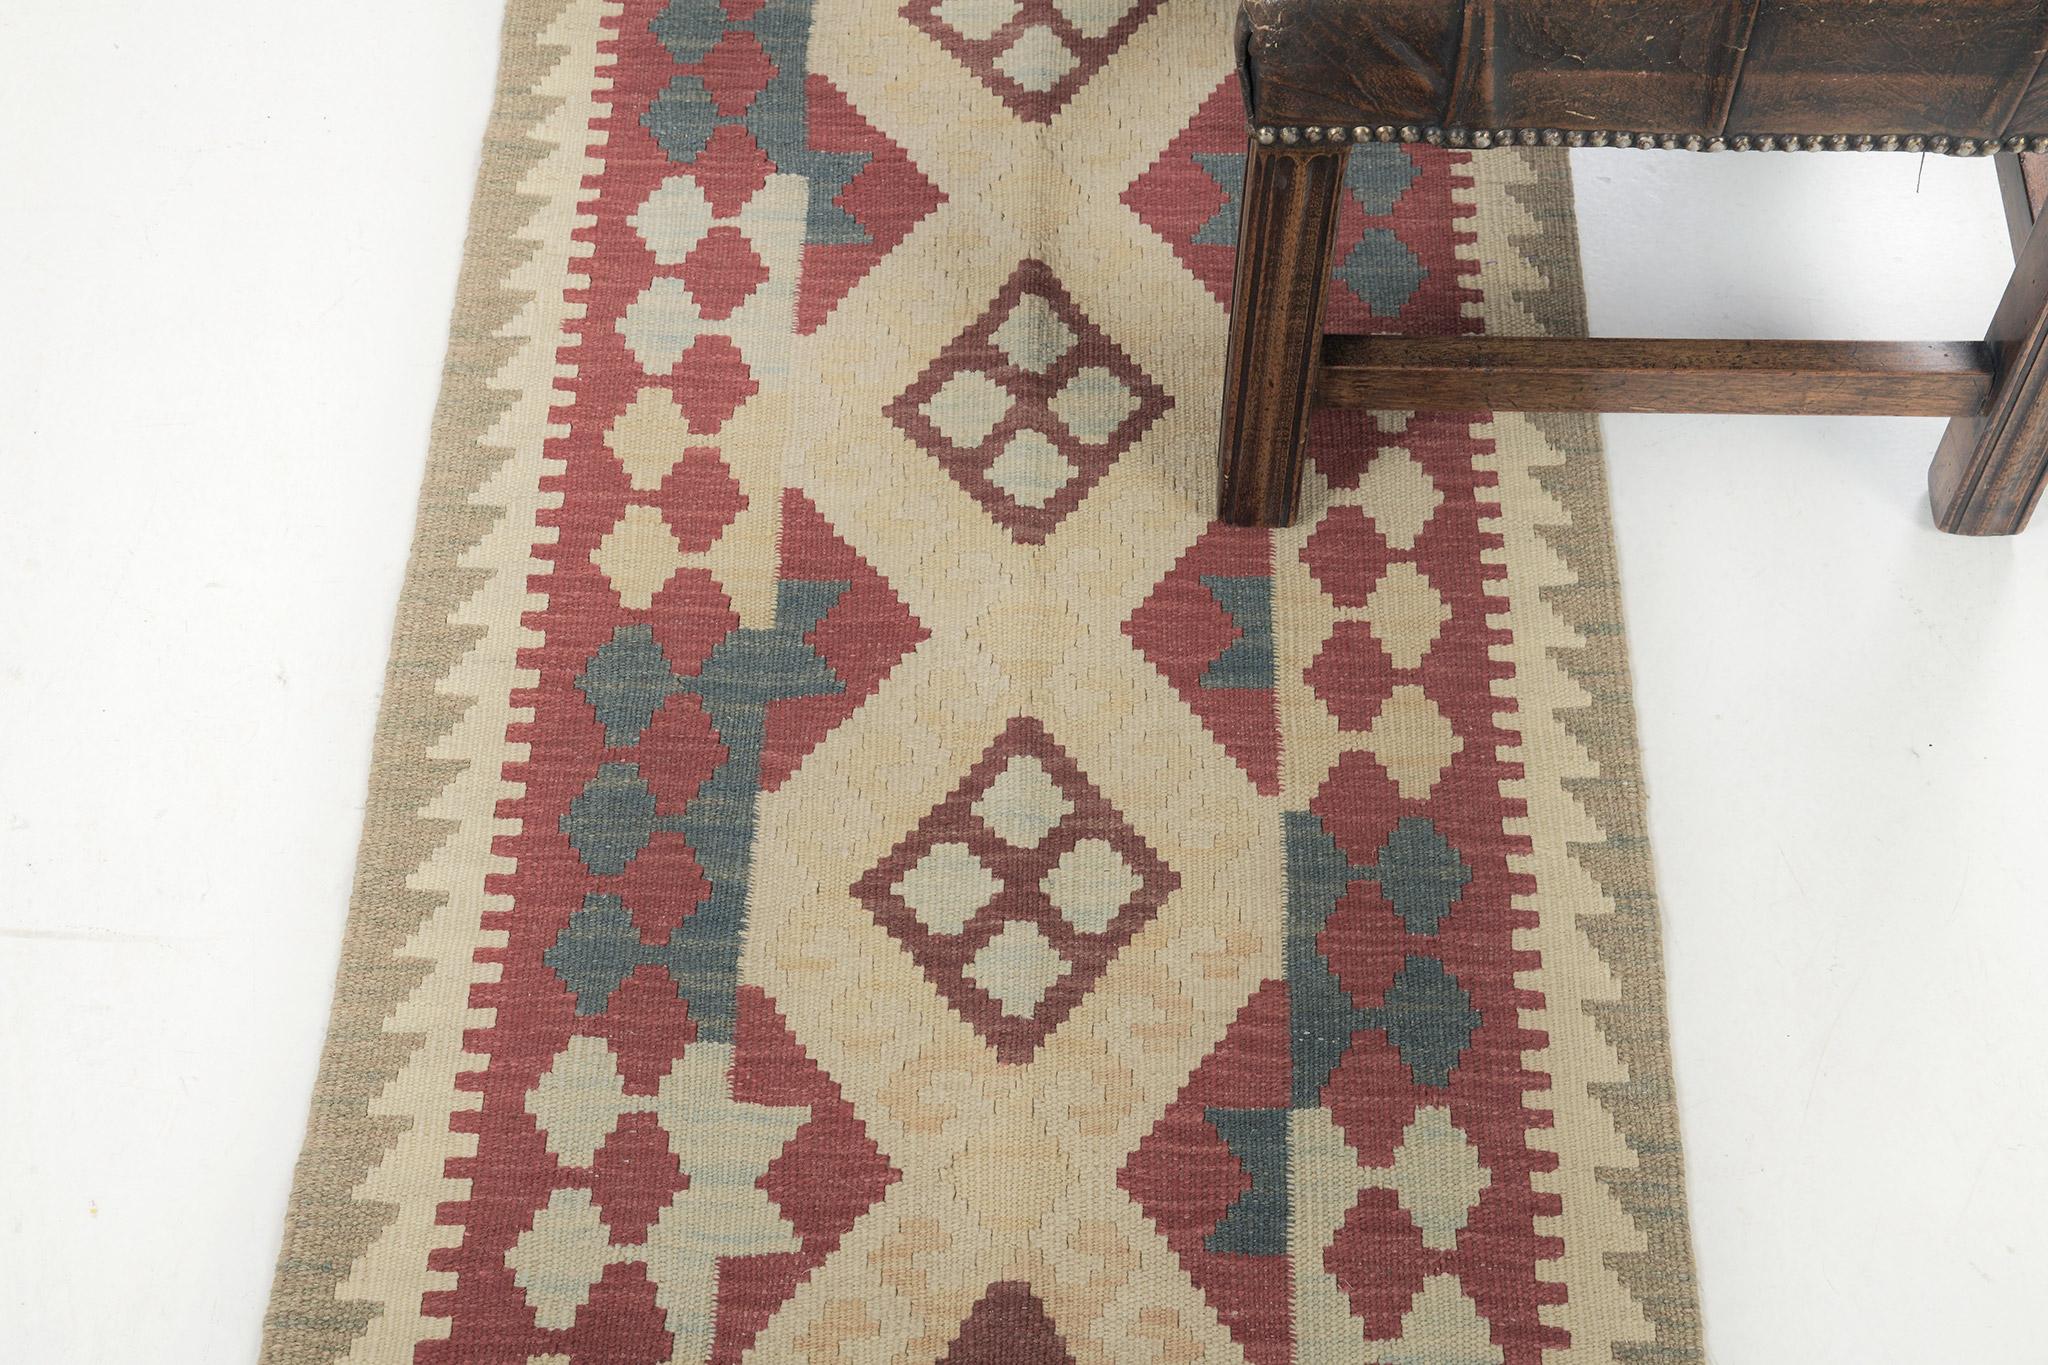 A gorgeous vintage-style Kilim flatweave banded with a neutral palette zigzag. The series of diamonds create a simple yet interesting design for a wide variety of interiors in a brilliant red field. Interestingly enough for your home interiors and